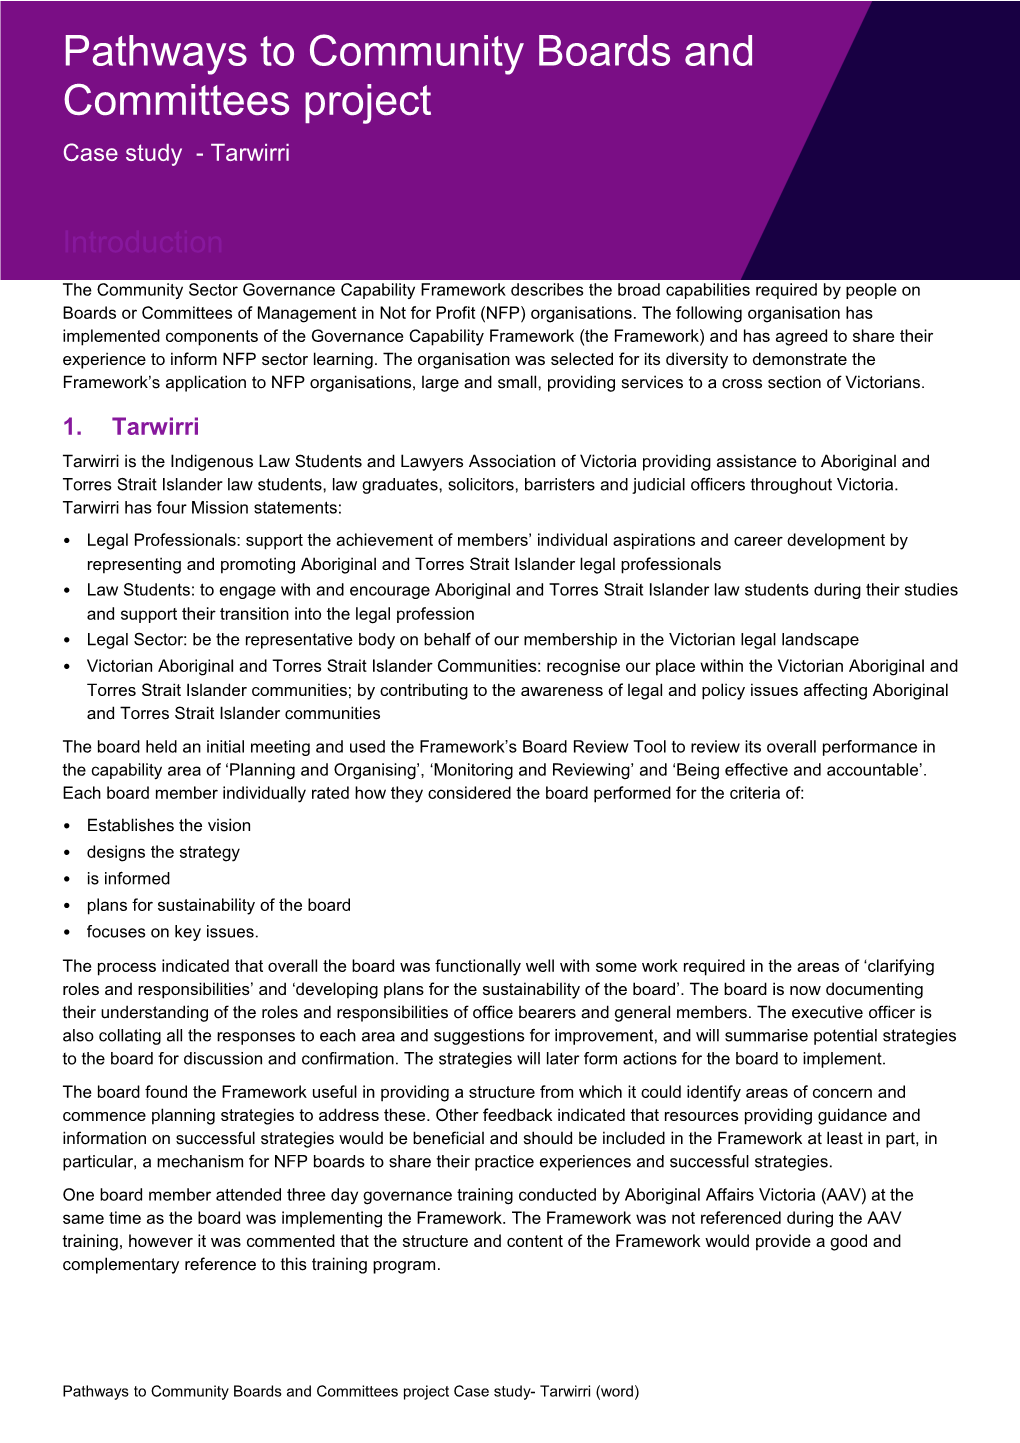 Pathways to Community Boards and Committees Project Case Study- Tarwirri (Word)